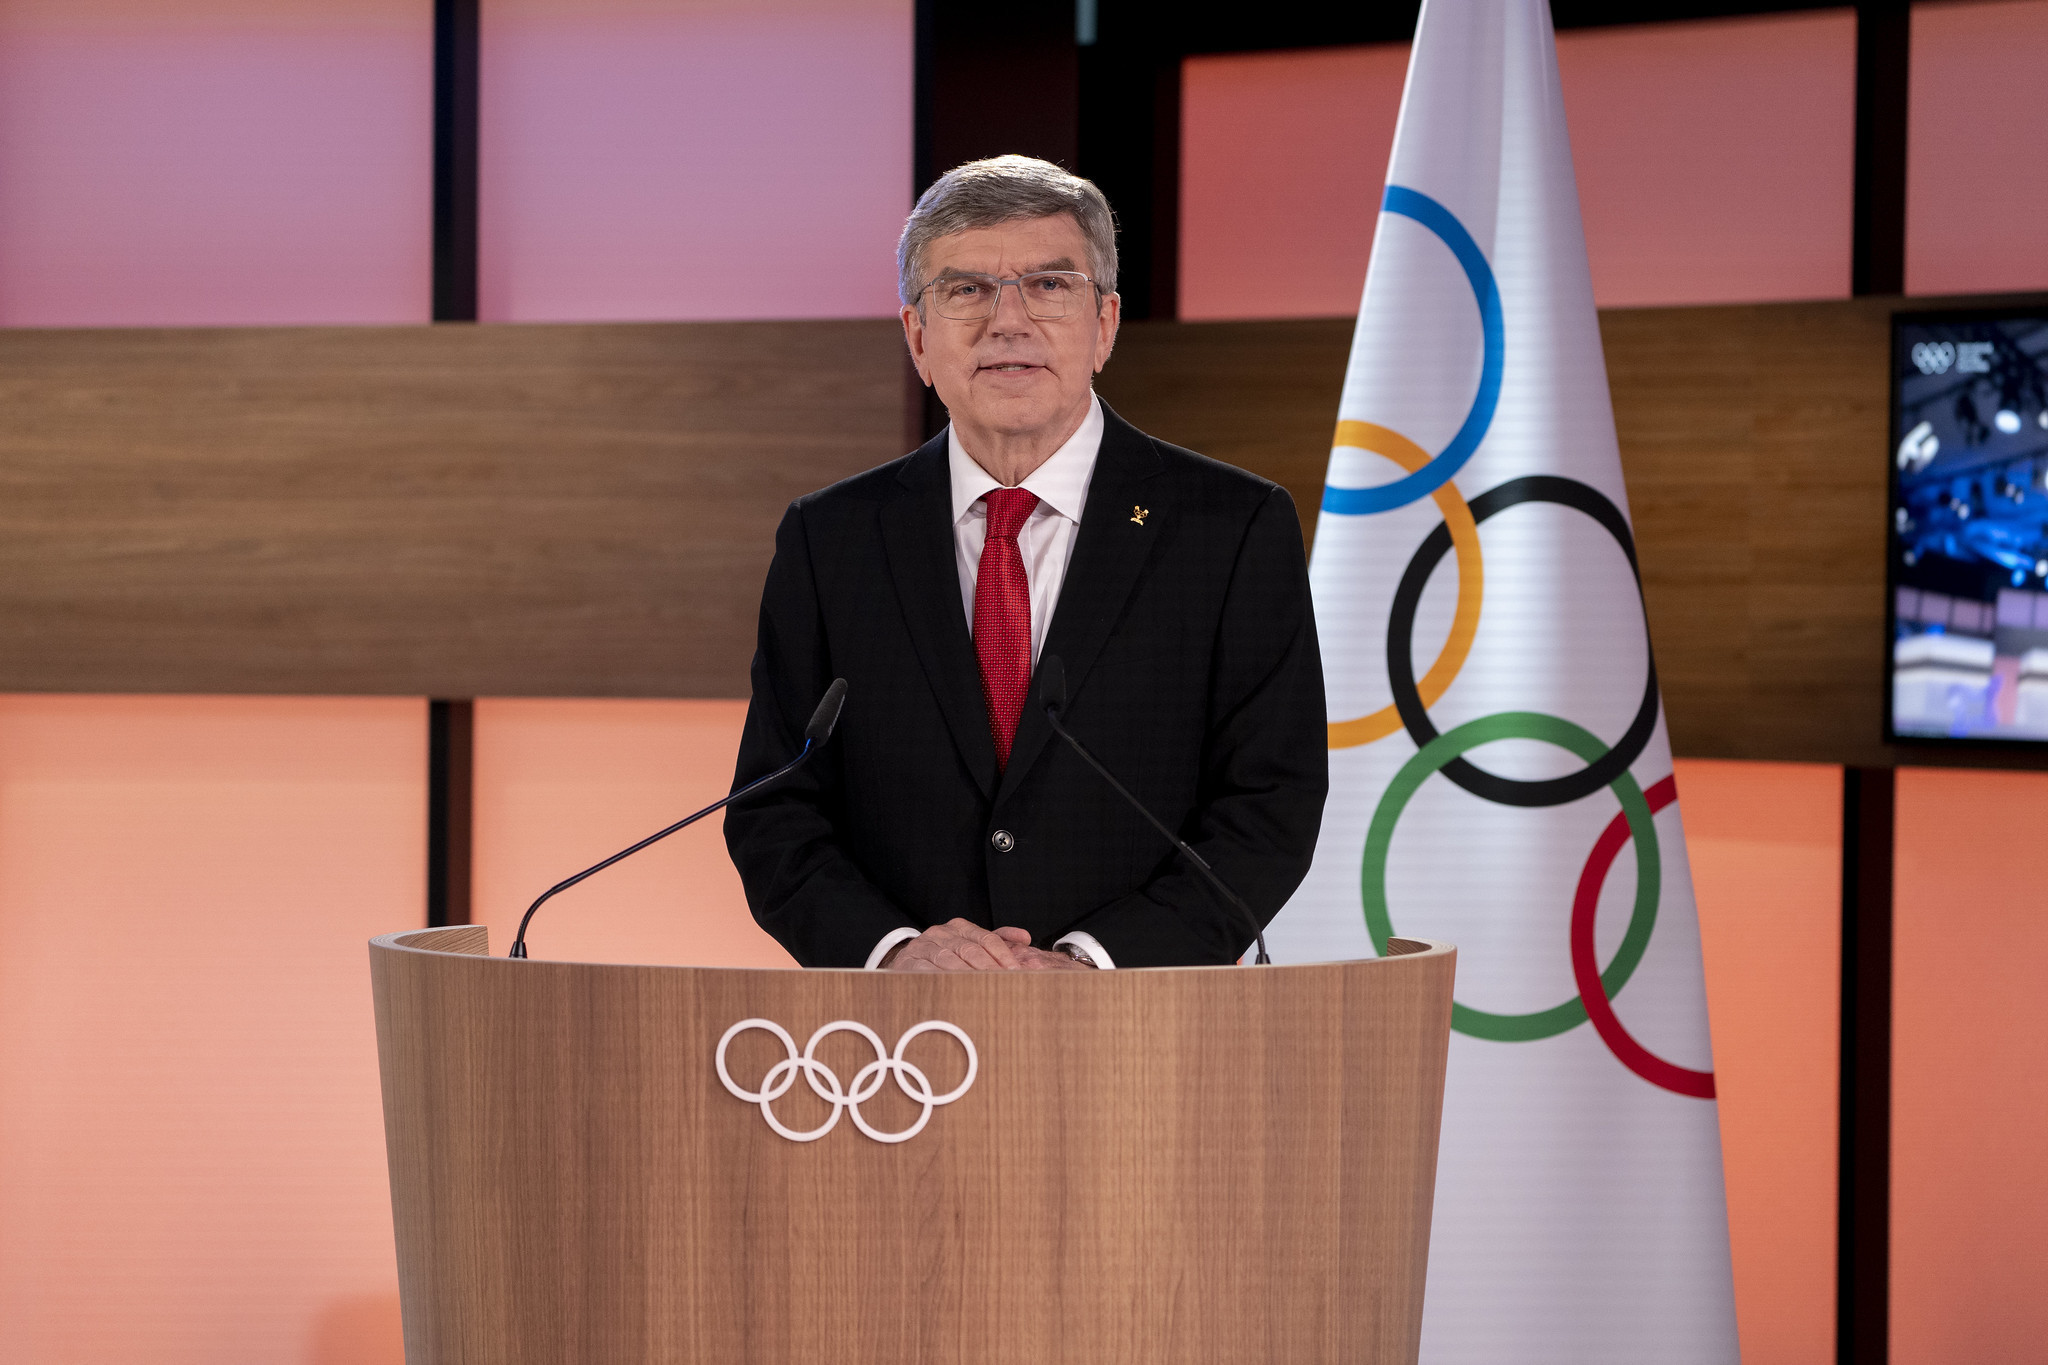 Bach Re-Elected International Olympic Committee President